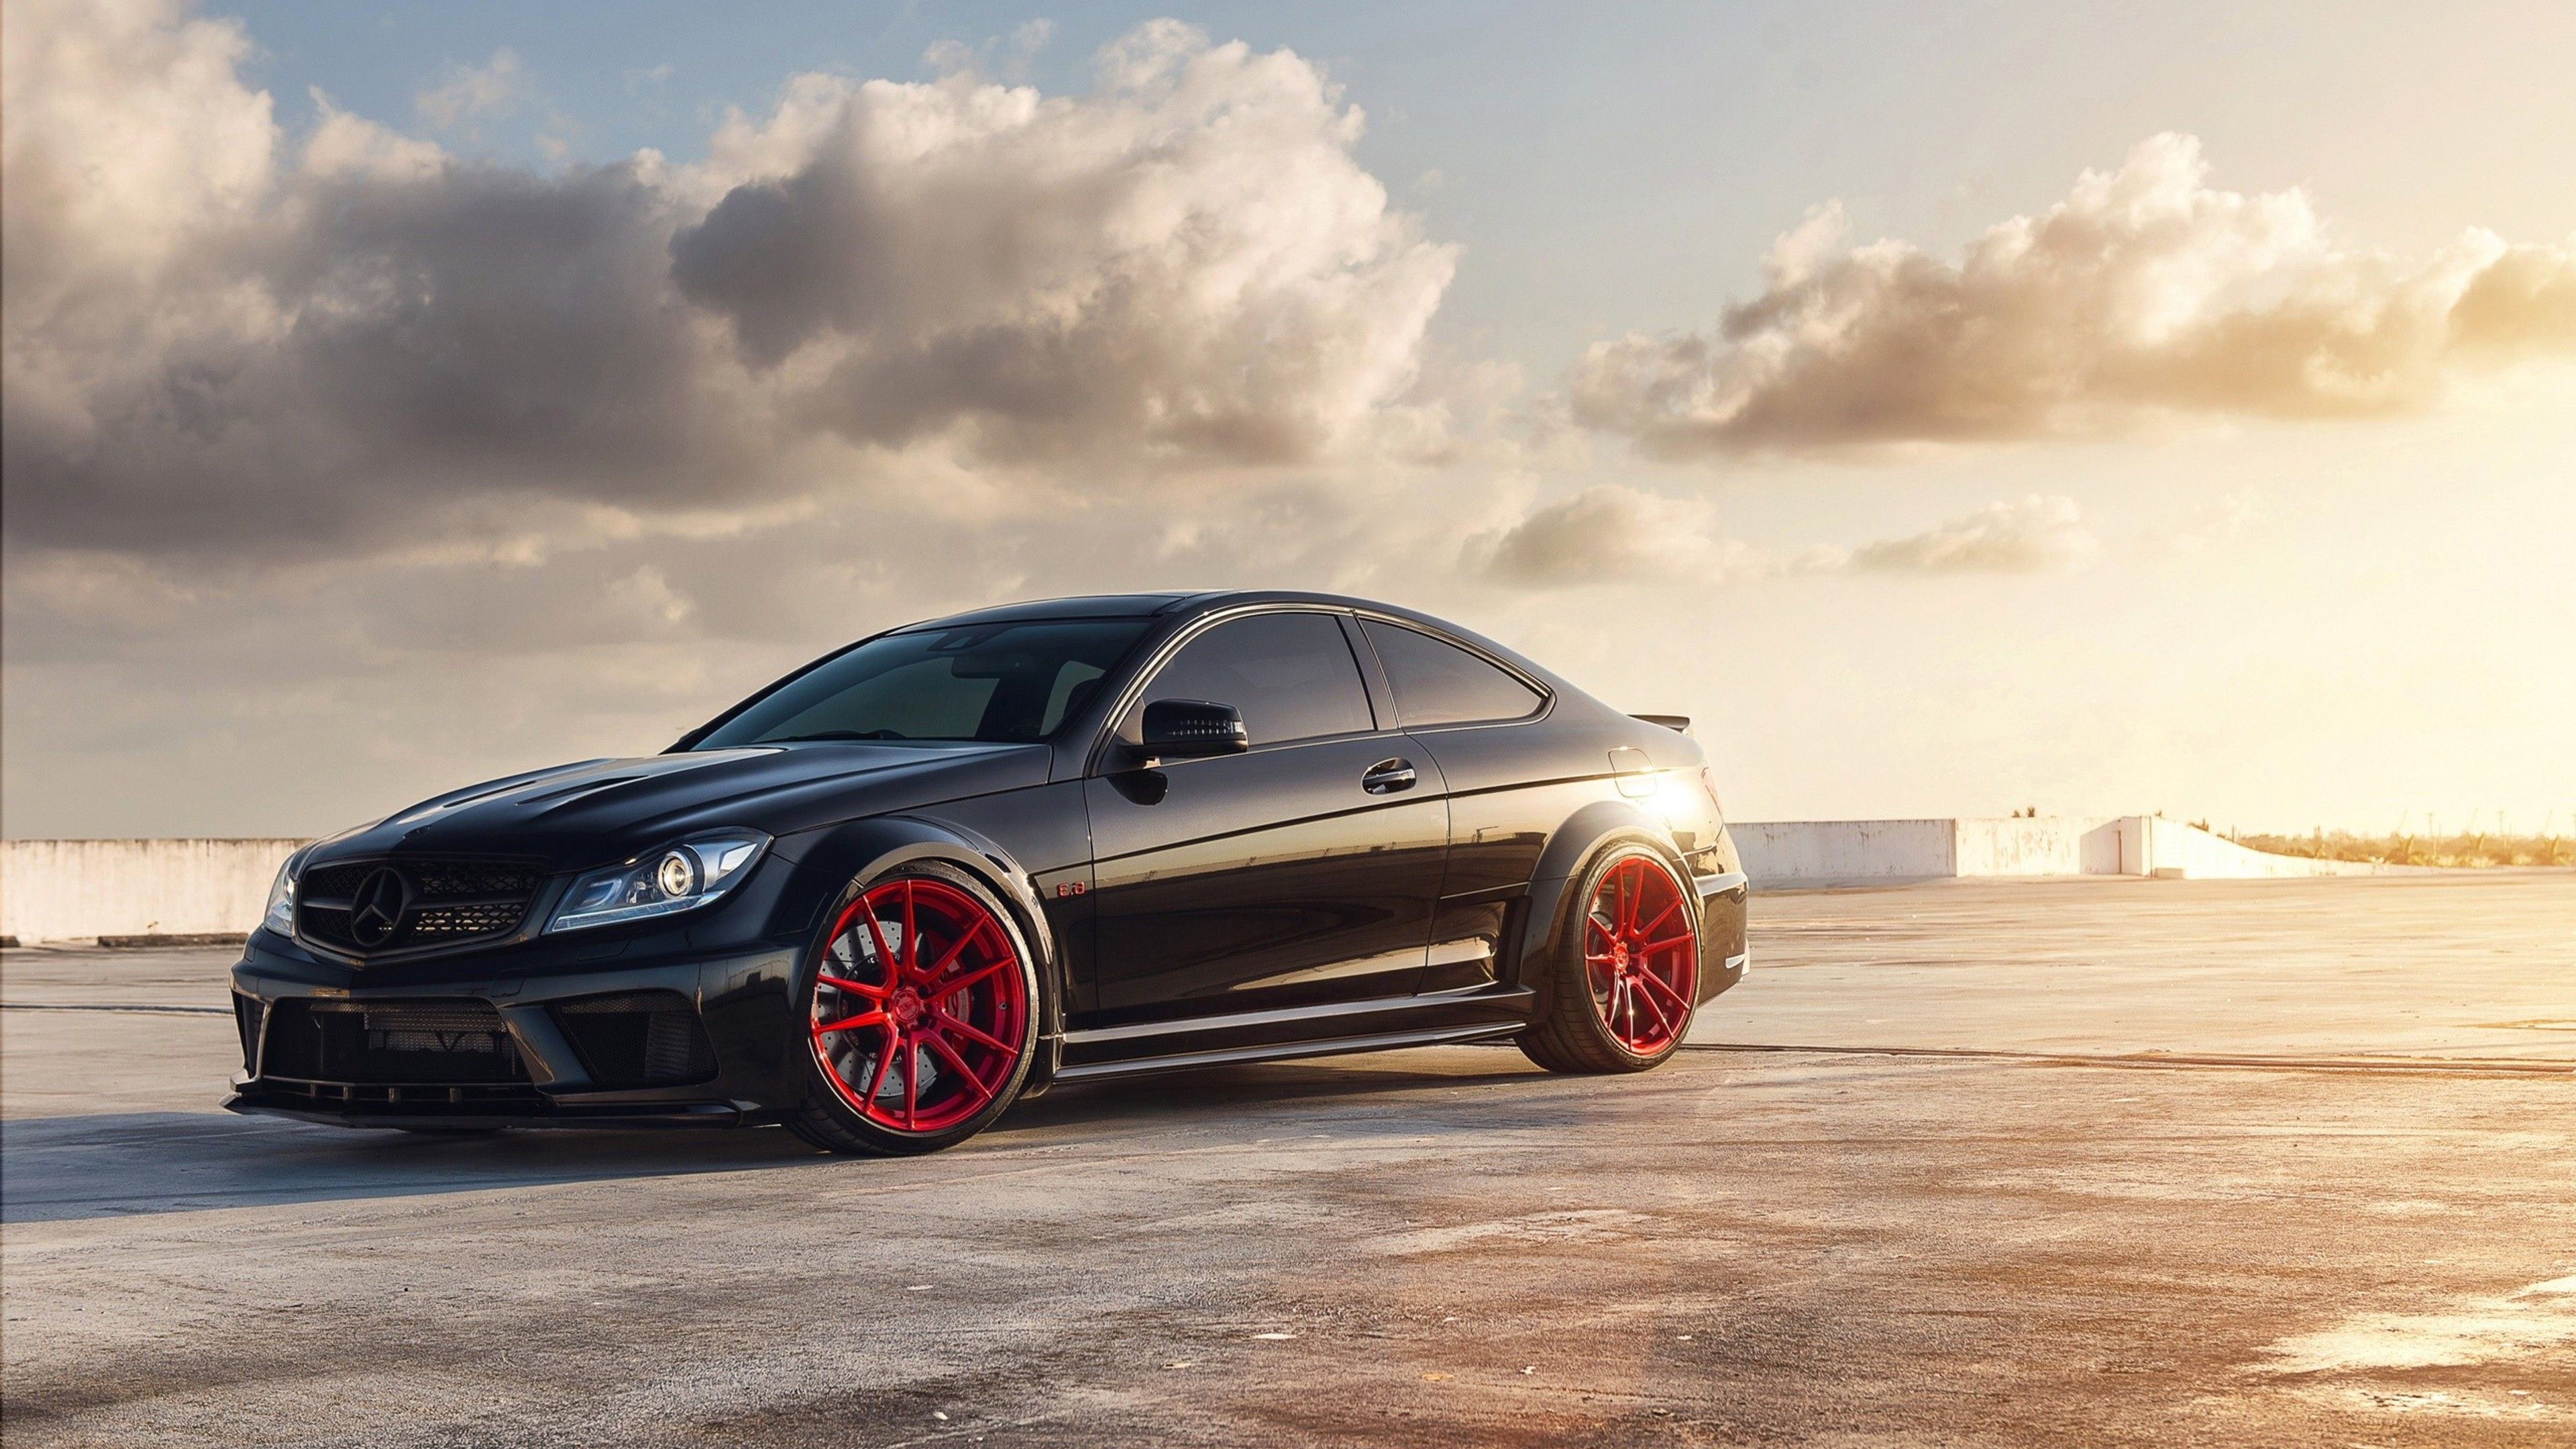 Mercedes Benz C63 Amg, HD Cars, 4k Wallpaper, Image, Background, Photo and Picture